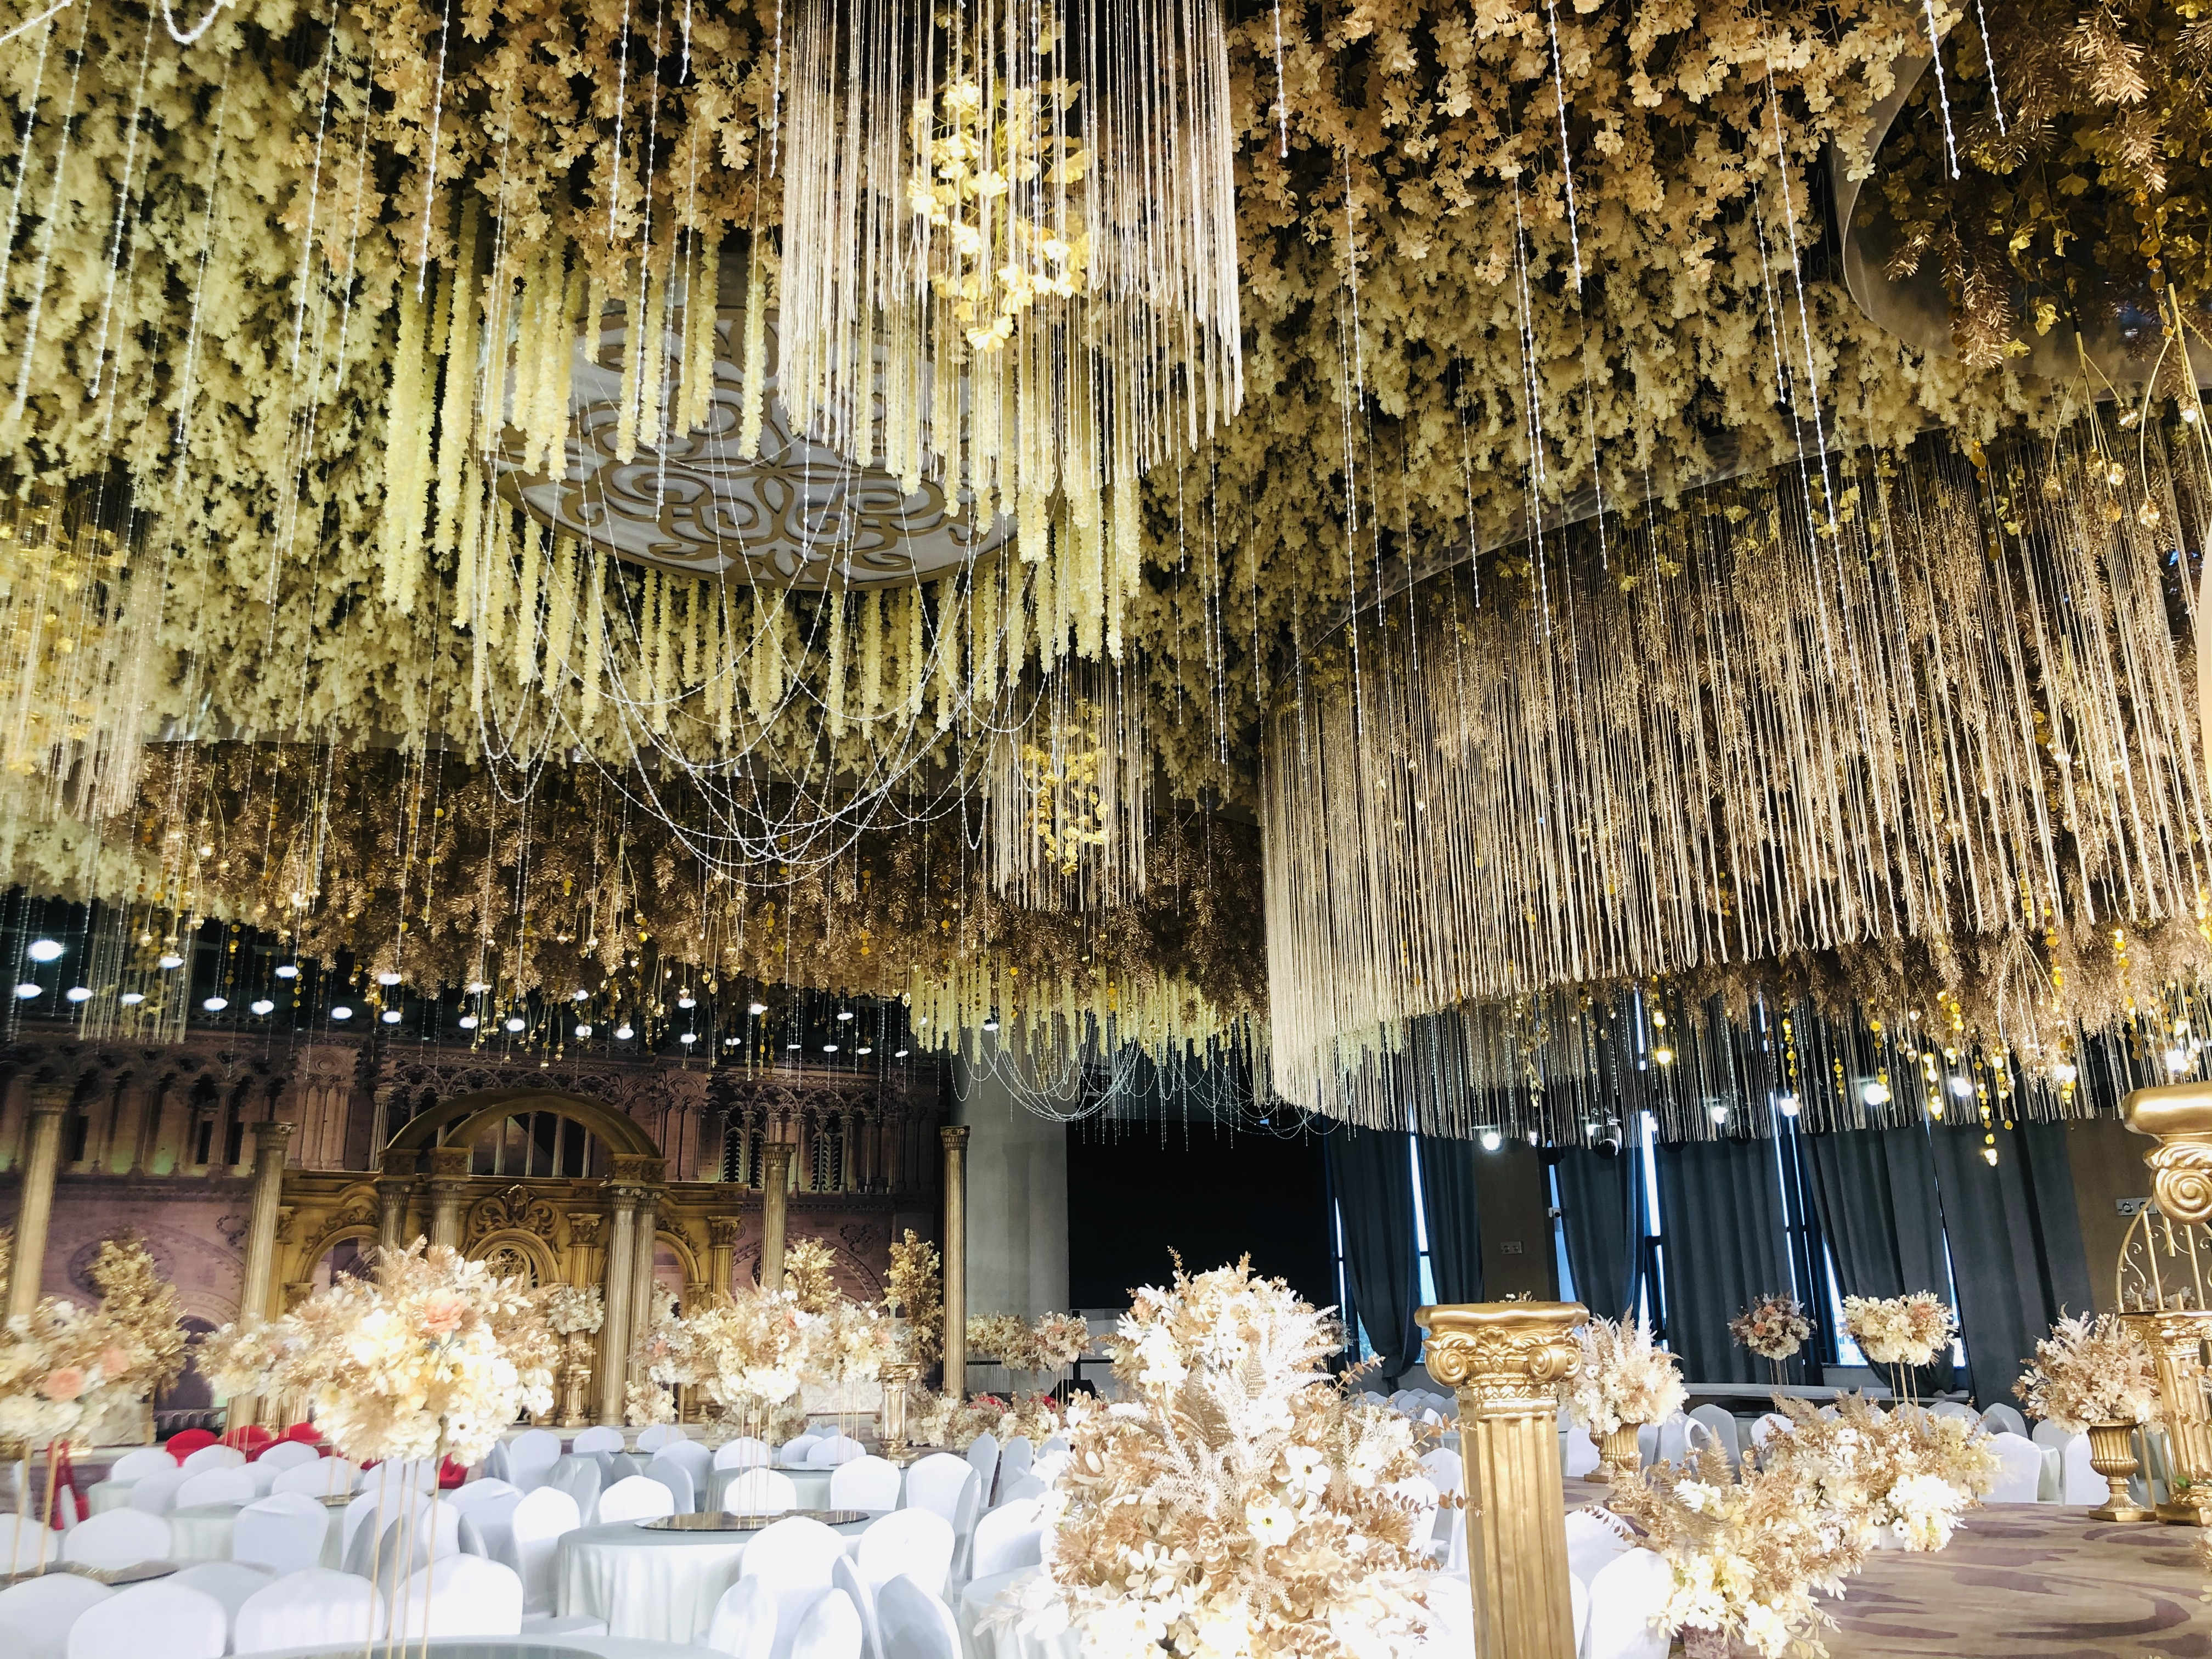 Banquet hall of Kaiyuan Hotel, Chizhou, Anhui Stage Sound Project